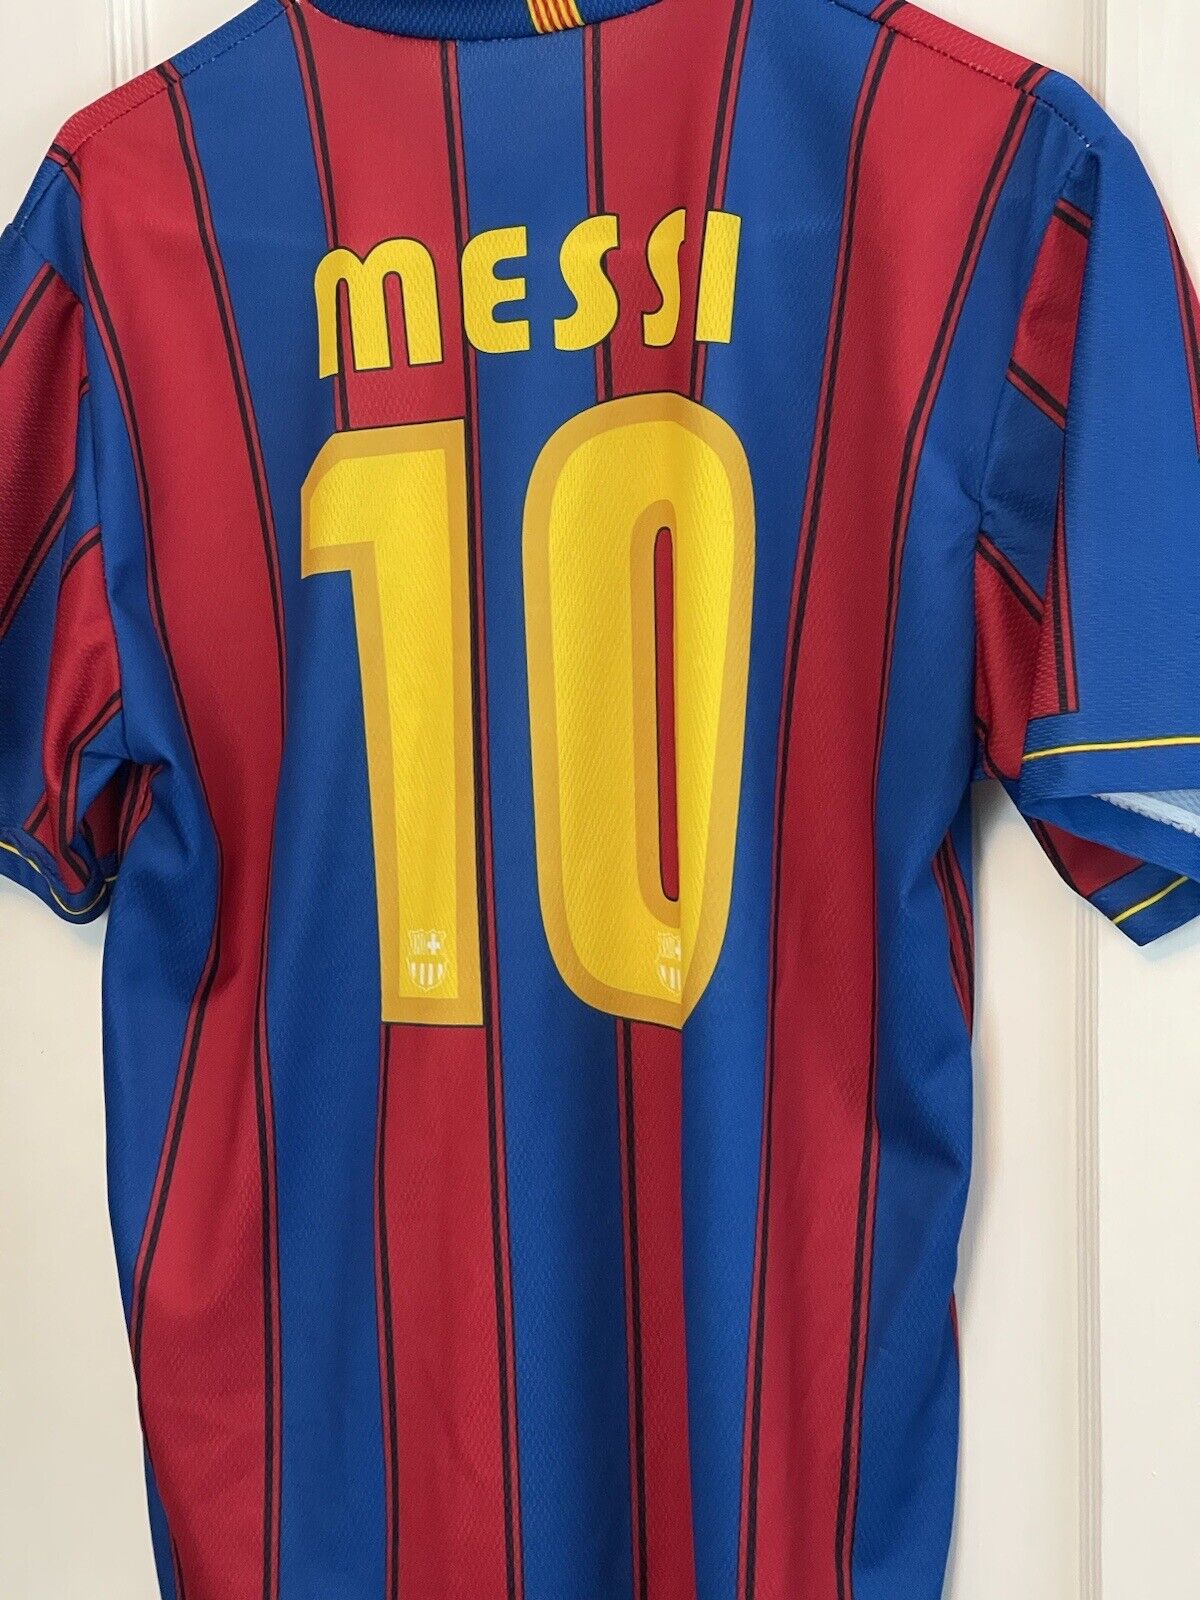 Barcelona Messi Soccer Jersey Shirt 2009/10 #10 size Small